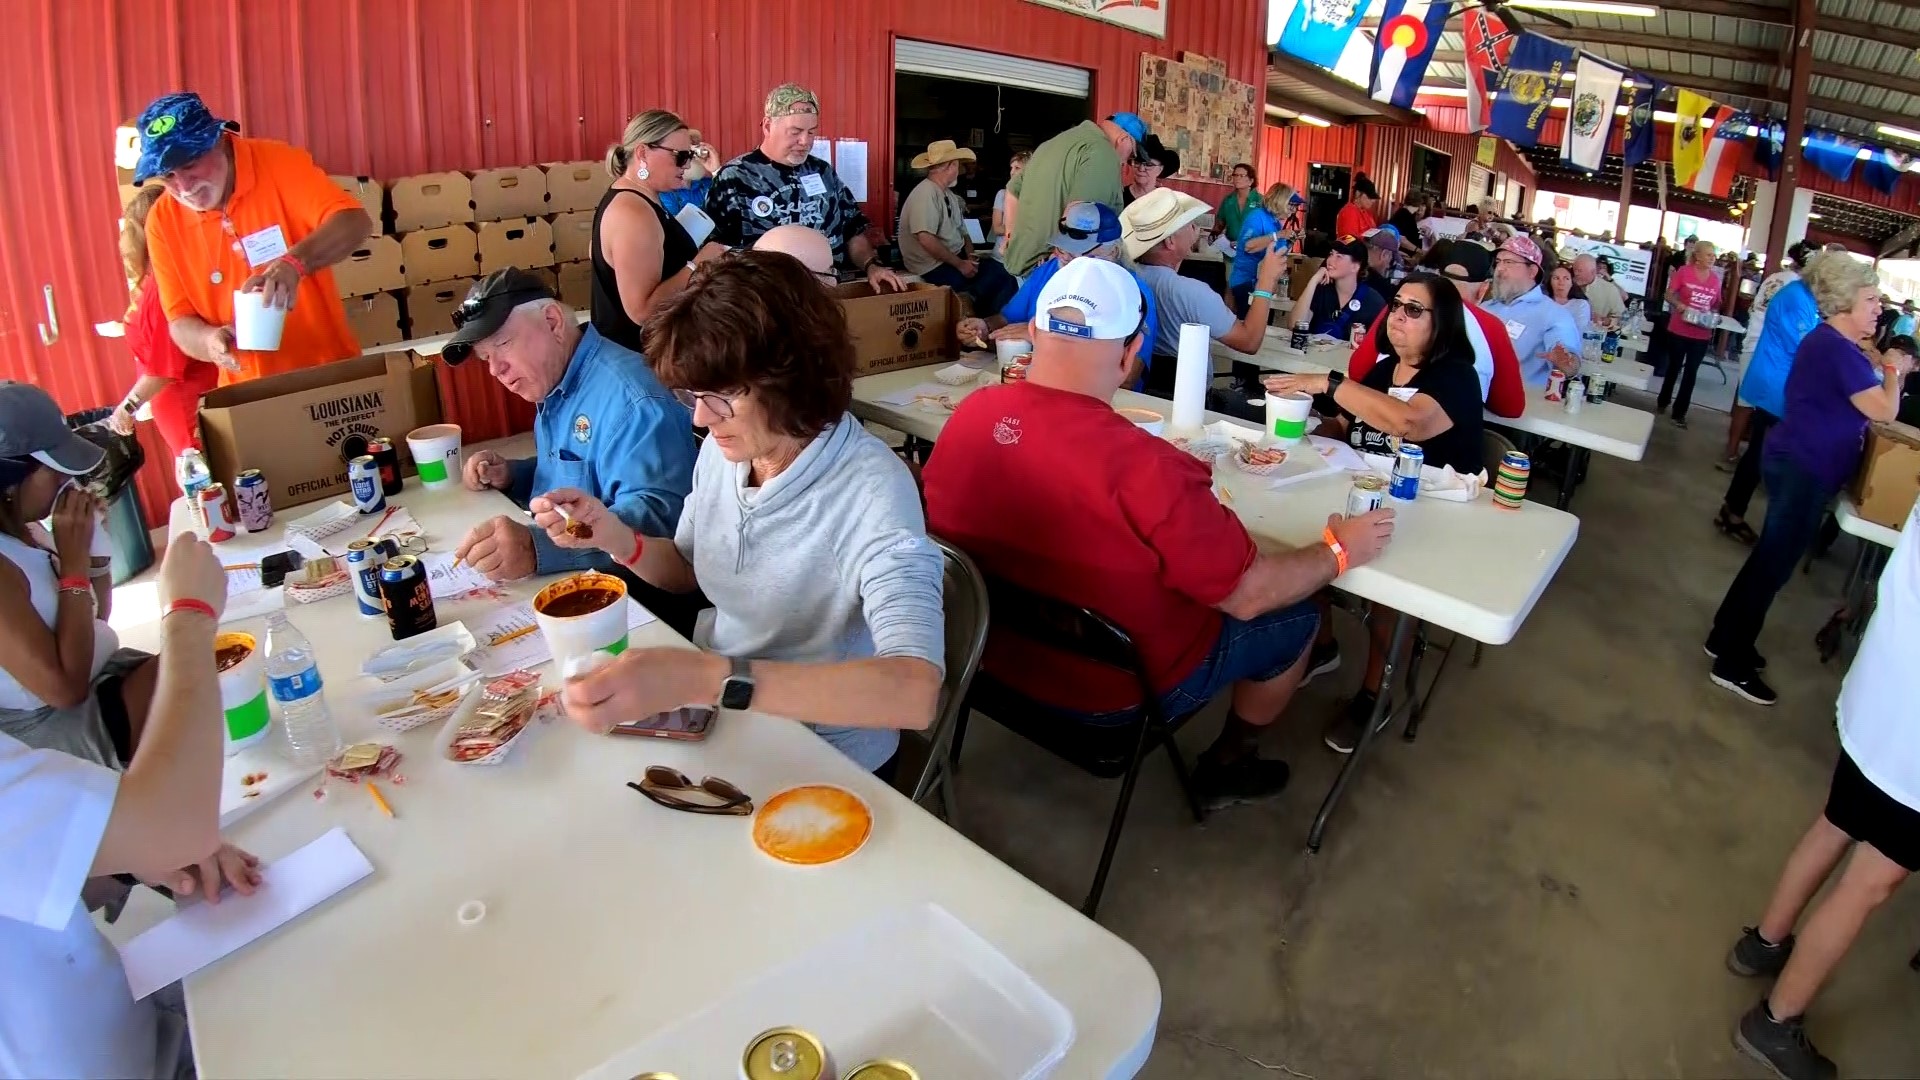 The 56th Terlingua Chili Cook-off brings chili lovers from around the world for a hot competition right here in West Texas.